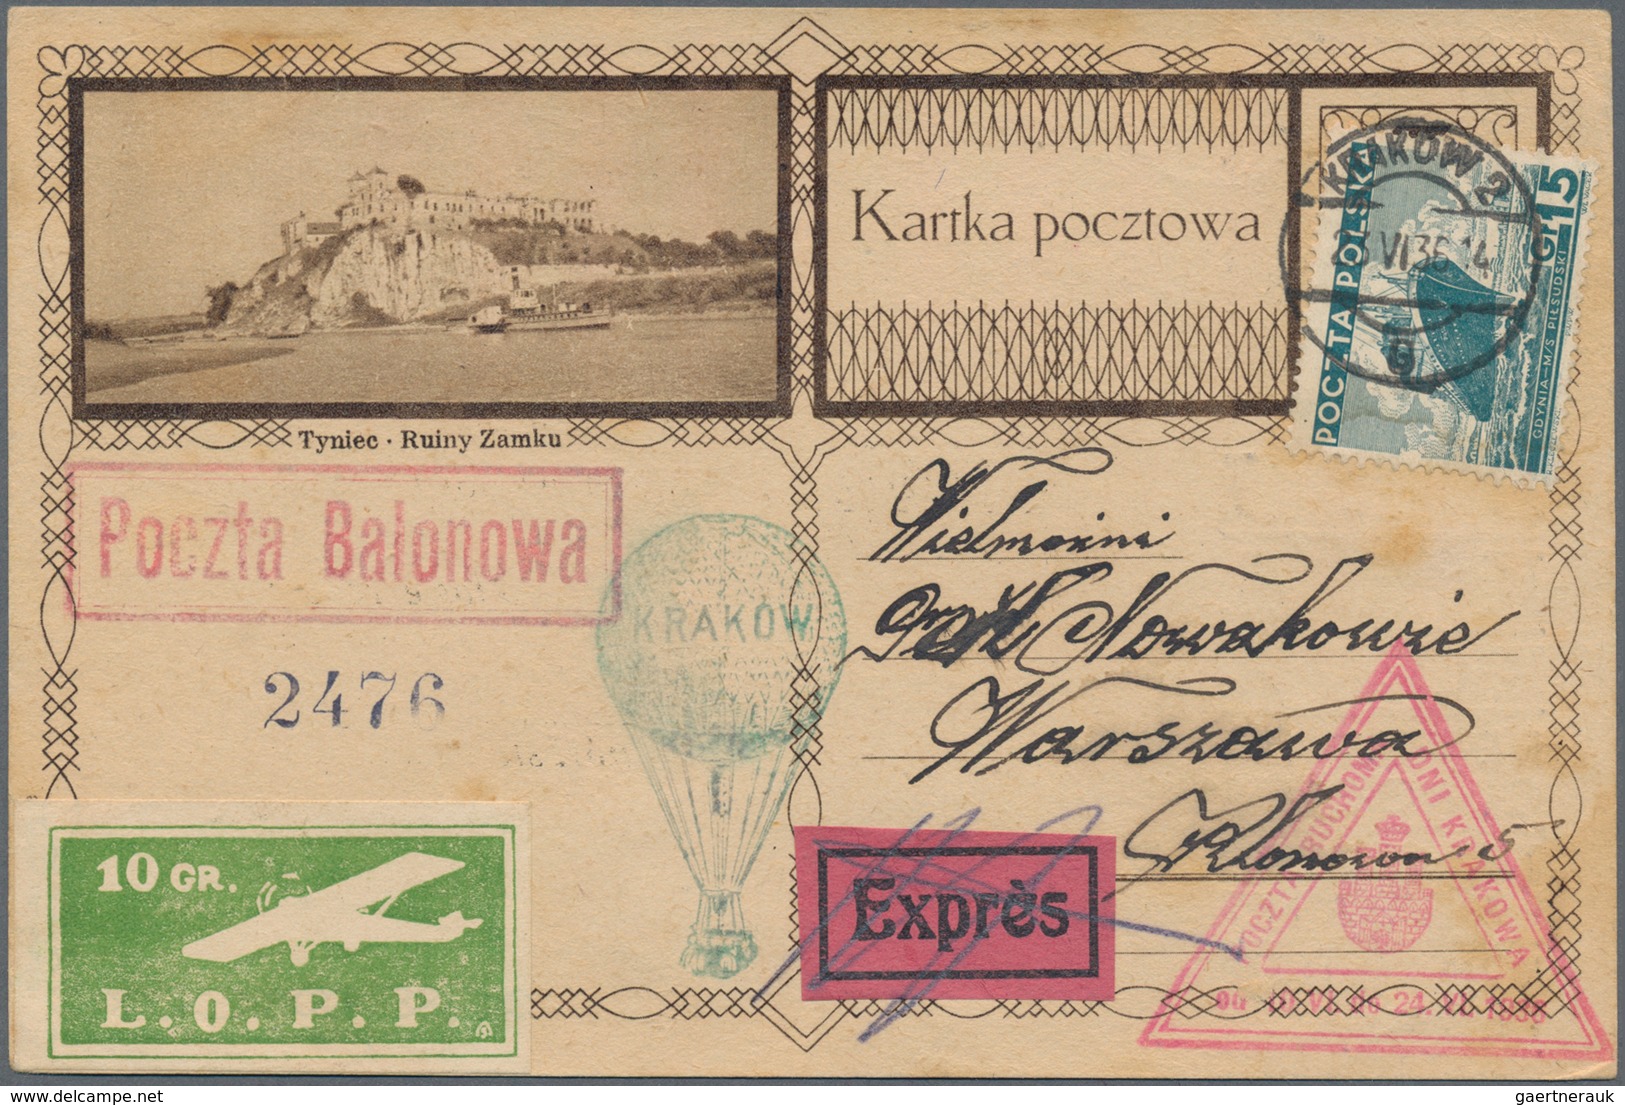 Ballonpost: 1936, Picture Card Franked With 15 Gr. With "Poczta Blonowa" With Balloon Cachets From K - Luchtballons